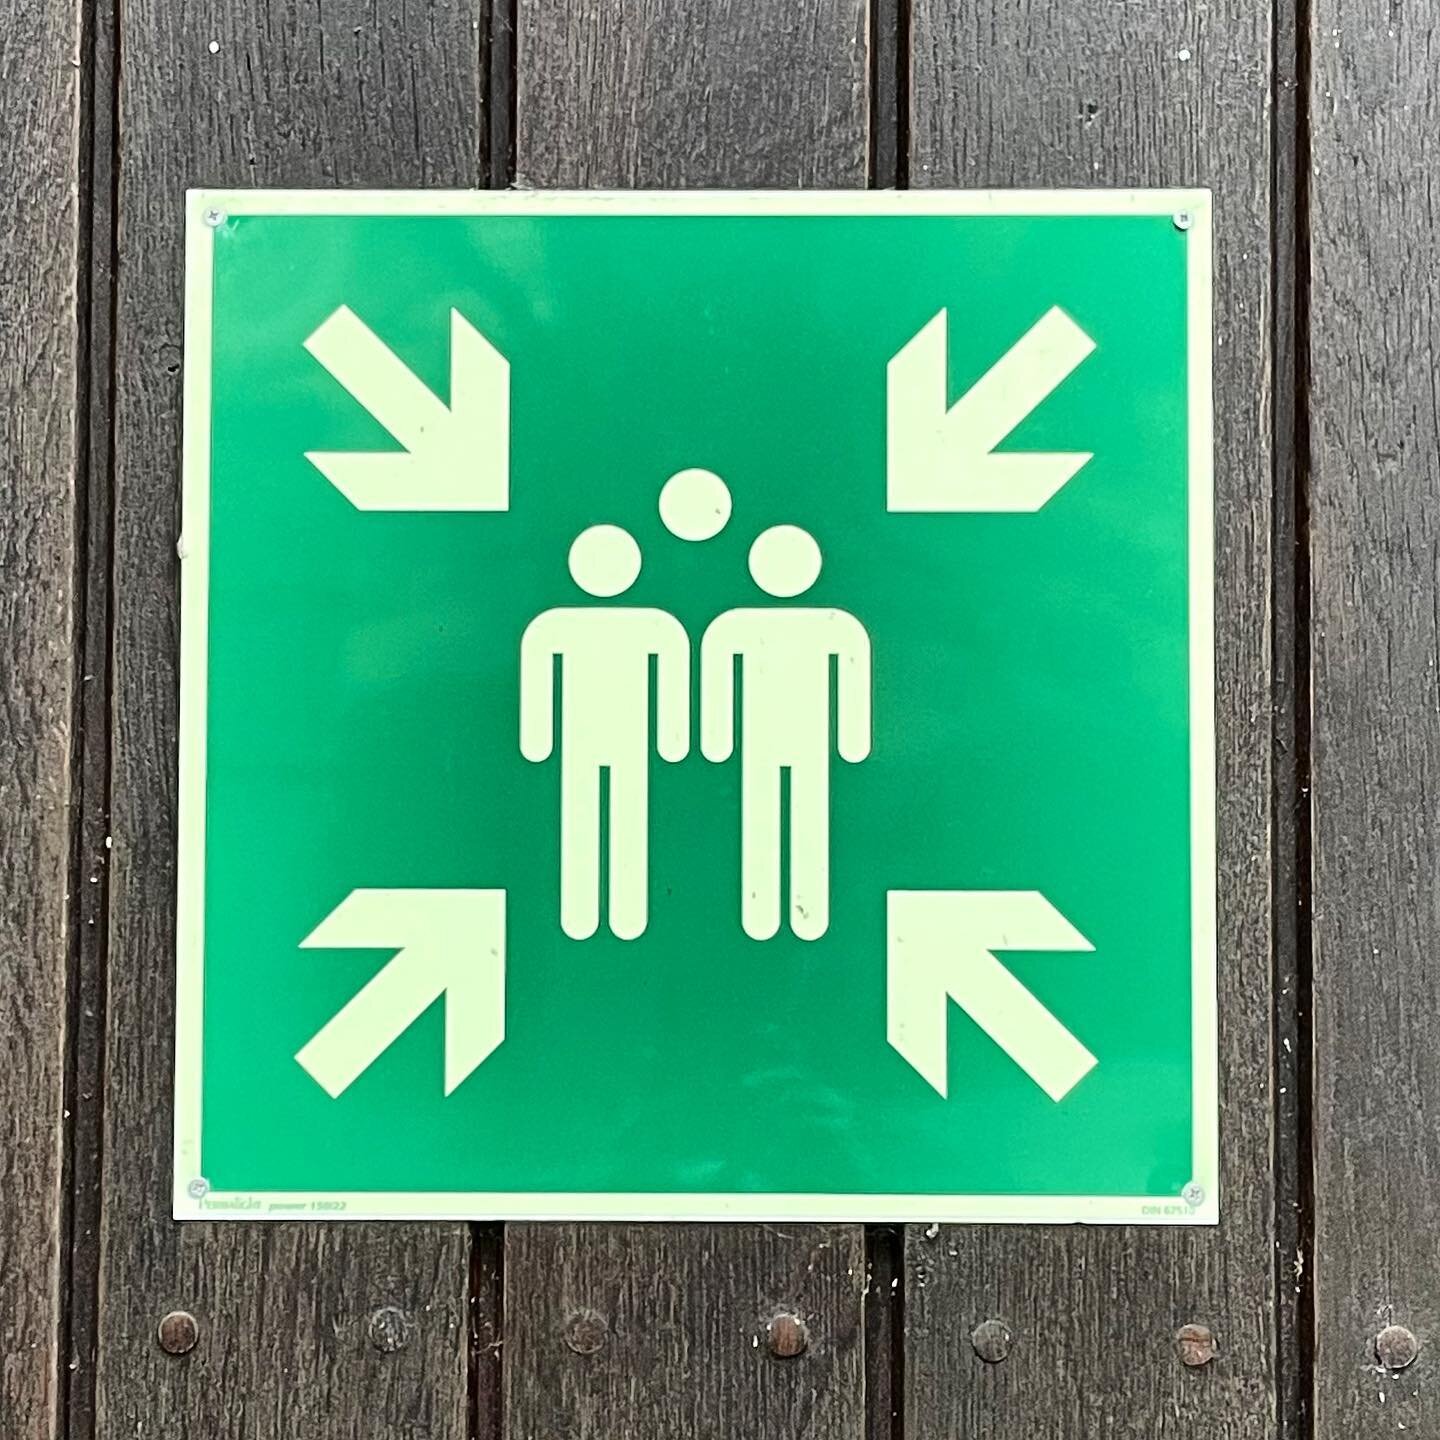 Since we&rsquo;re thinking about all things wayfinding all the time, Doug photographed this sign in Munich. 

We think it&rsquo;s the official symbol for seances. 

What do you think it&rsquo;s for? Wrong answers only.

#infographics #wayfindingsigna